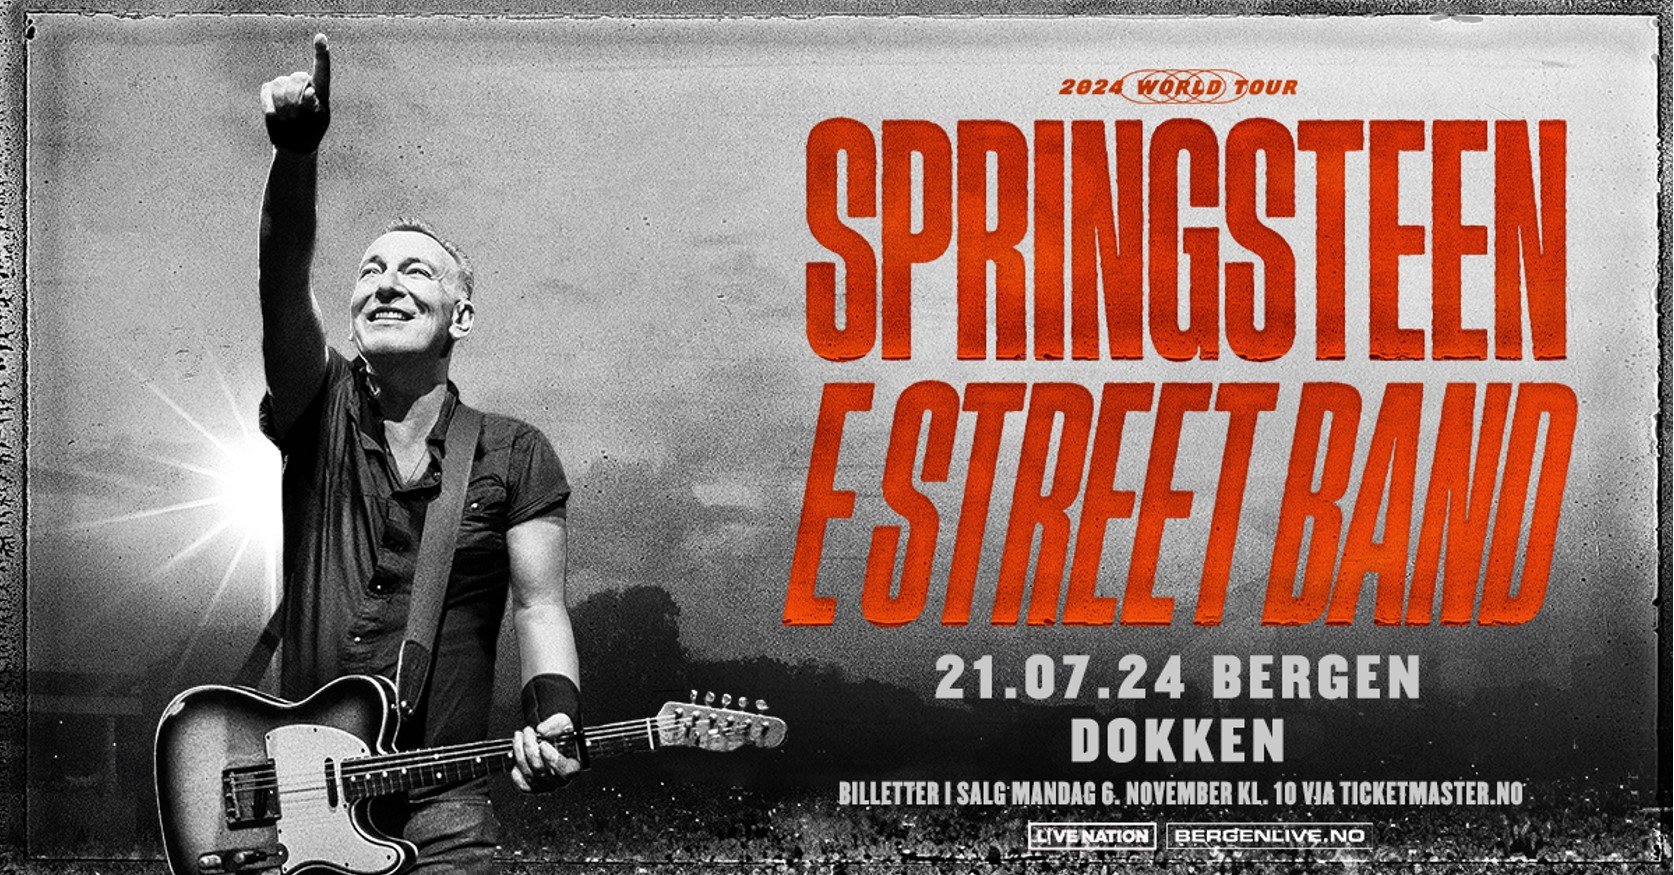 Bruce Springsteen is going to perform in the Port of Bergen